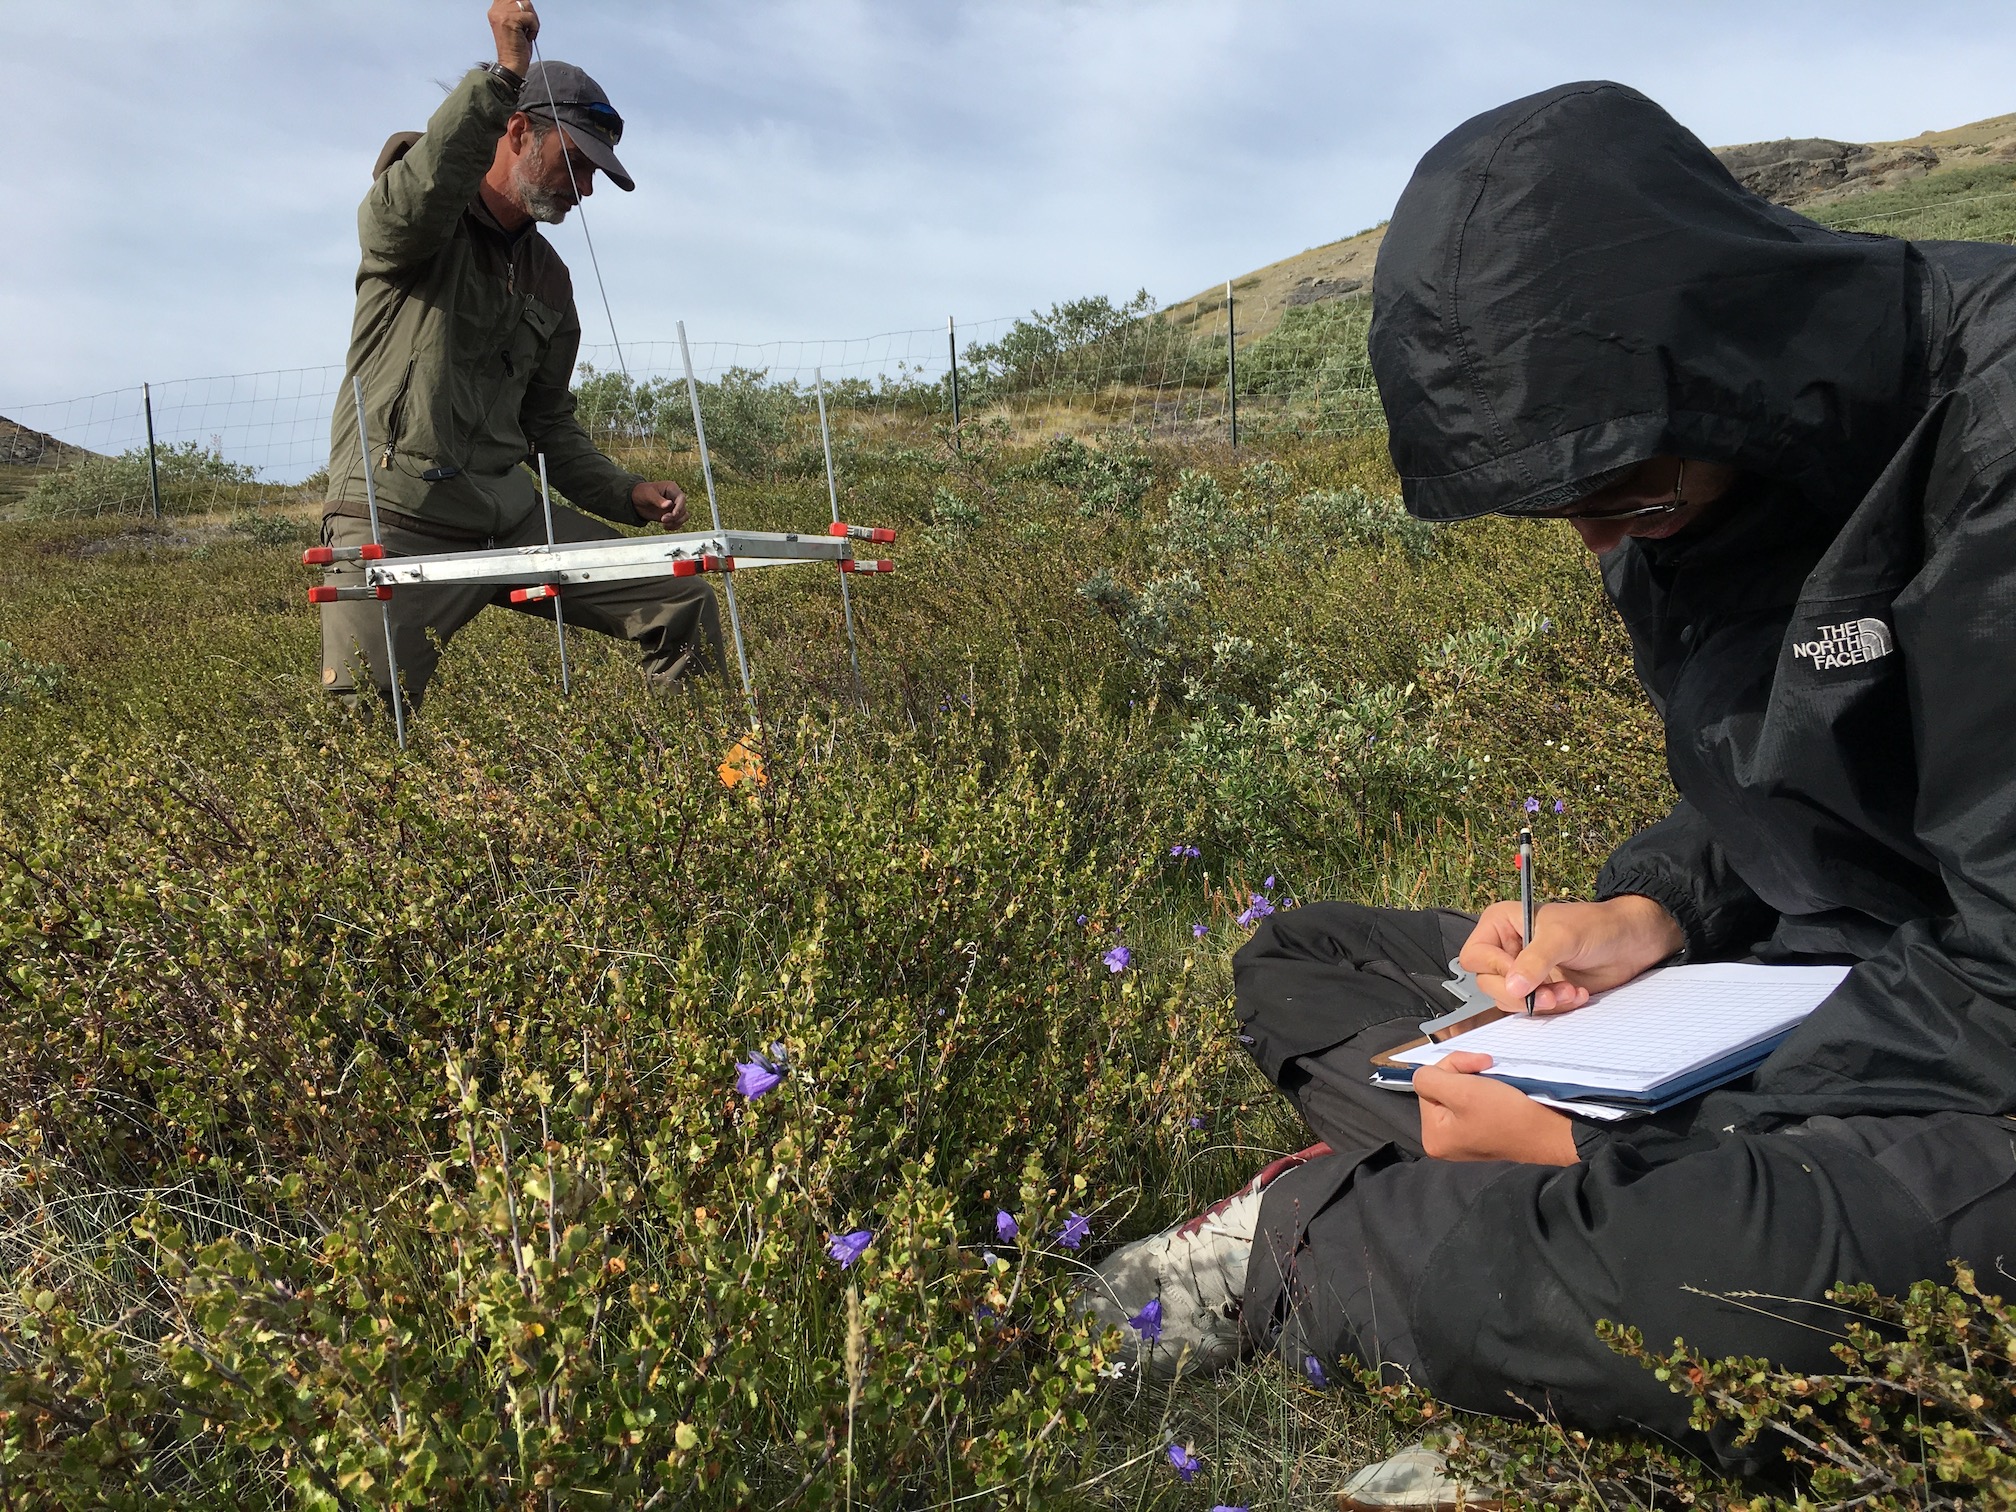 Eric Post, left, conducts field work with a colleague in Greenland. His work is helping us better understand how climate change is expected to impact large mammals in the Arctic, like caribou and musk oxen. (Emma Behr)